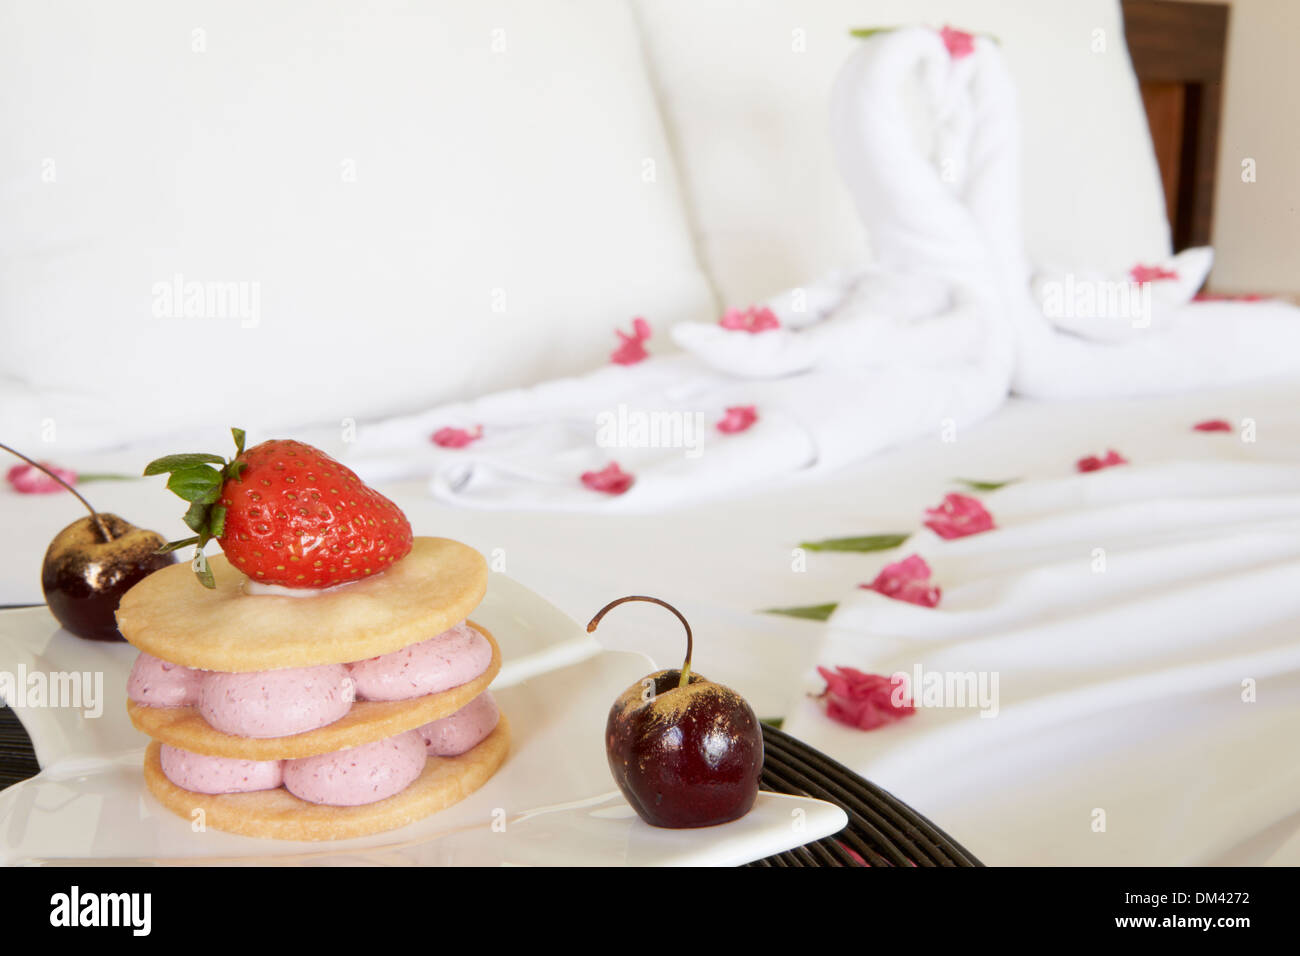 Dessert On Plate Next To Decorated Hotel Bed Stock Photo